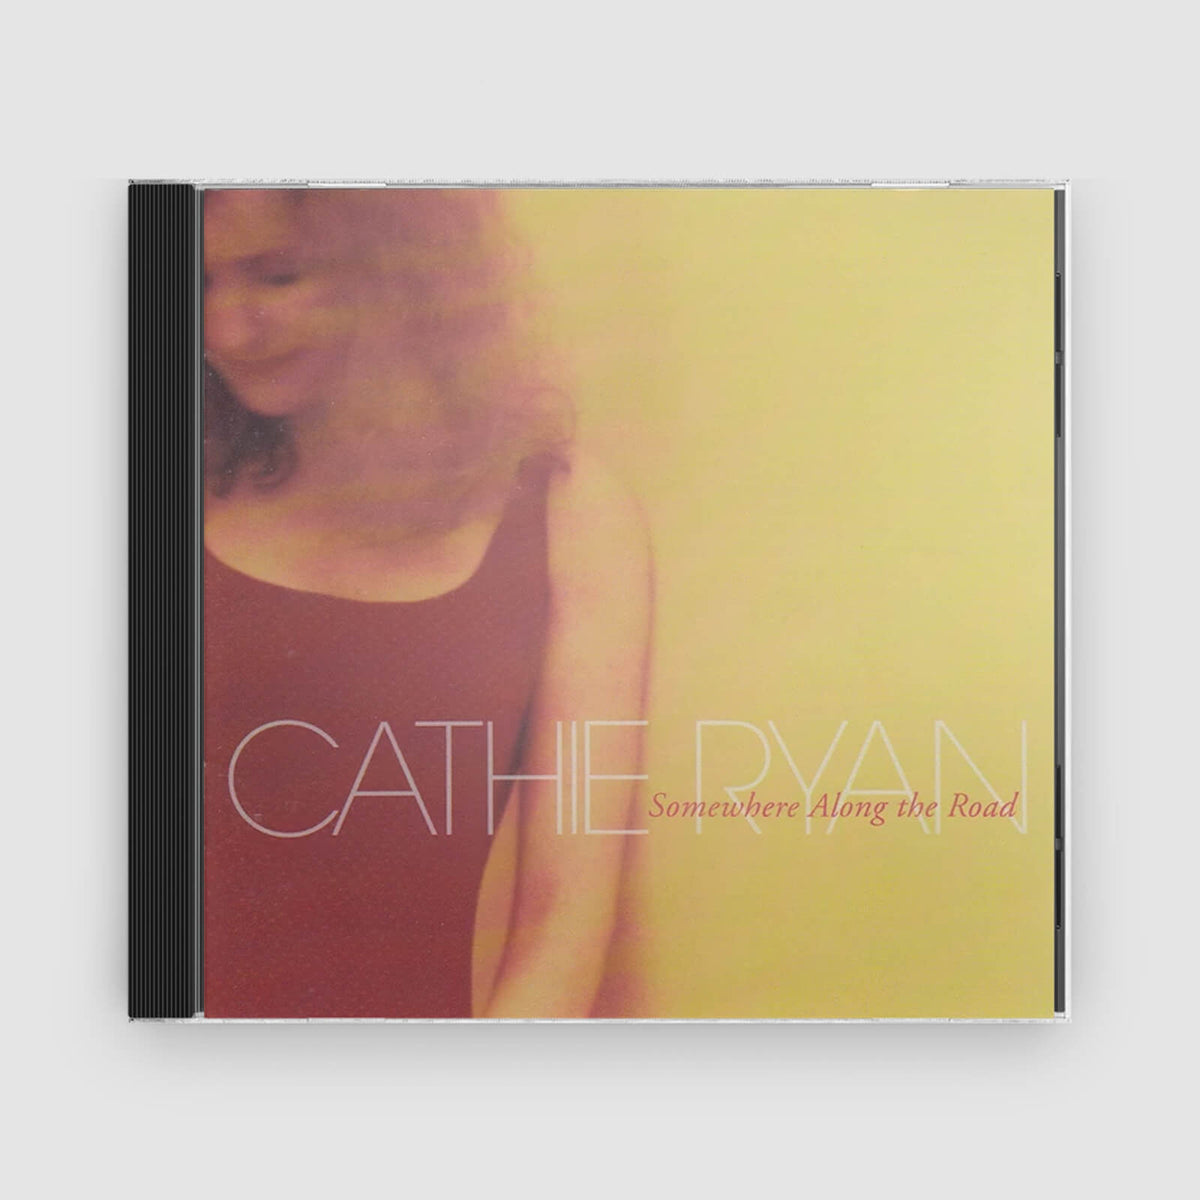 Cathie Ryan : Somewhere Along The Road